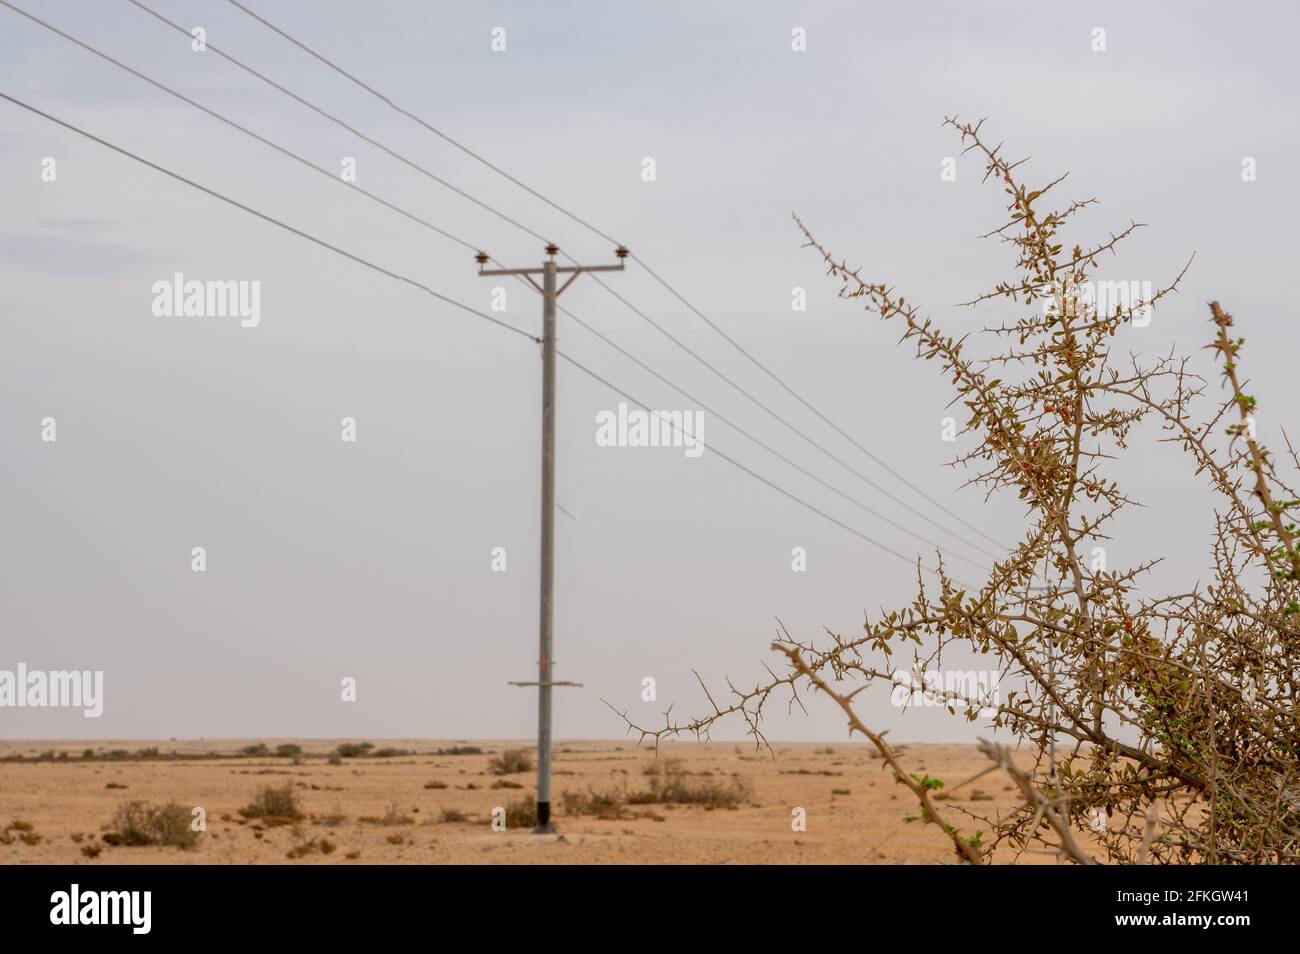 Desert landscape with electric towers and Desert thorn Lycium shawii plant. Selective focus Stock Photo